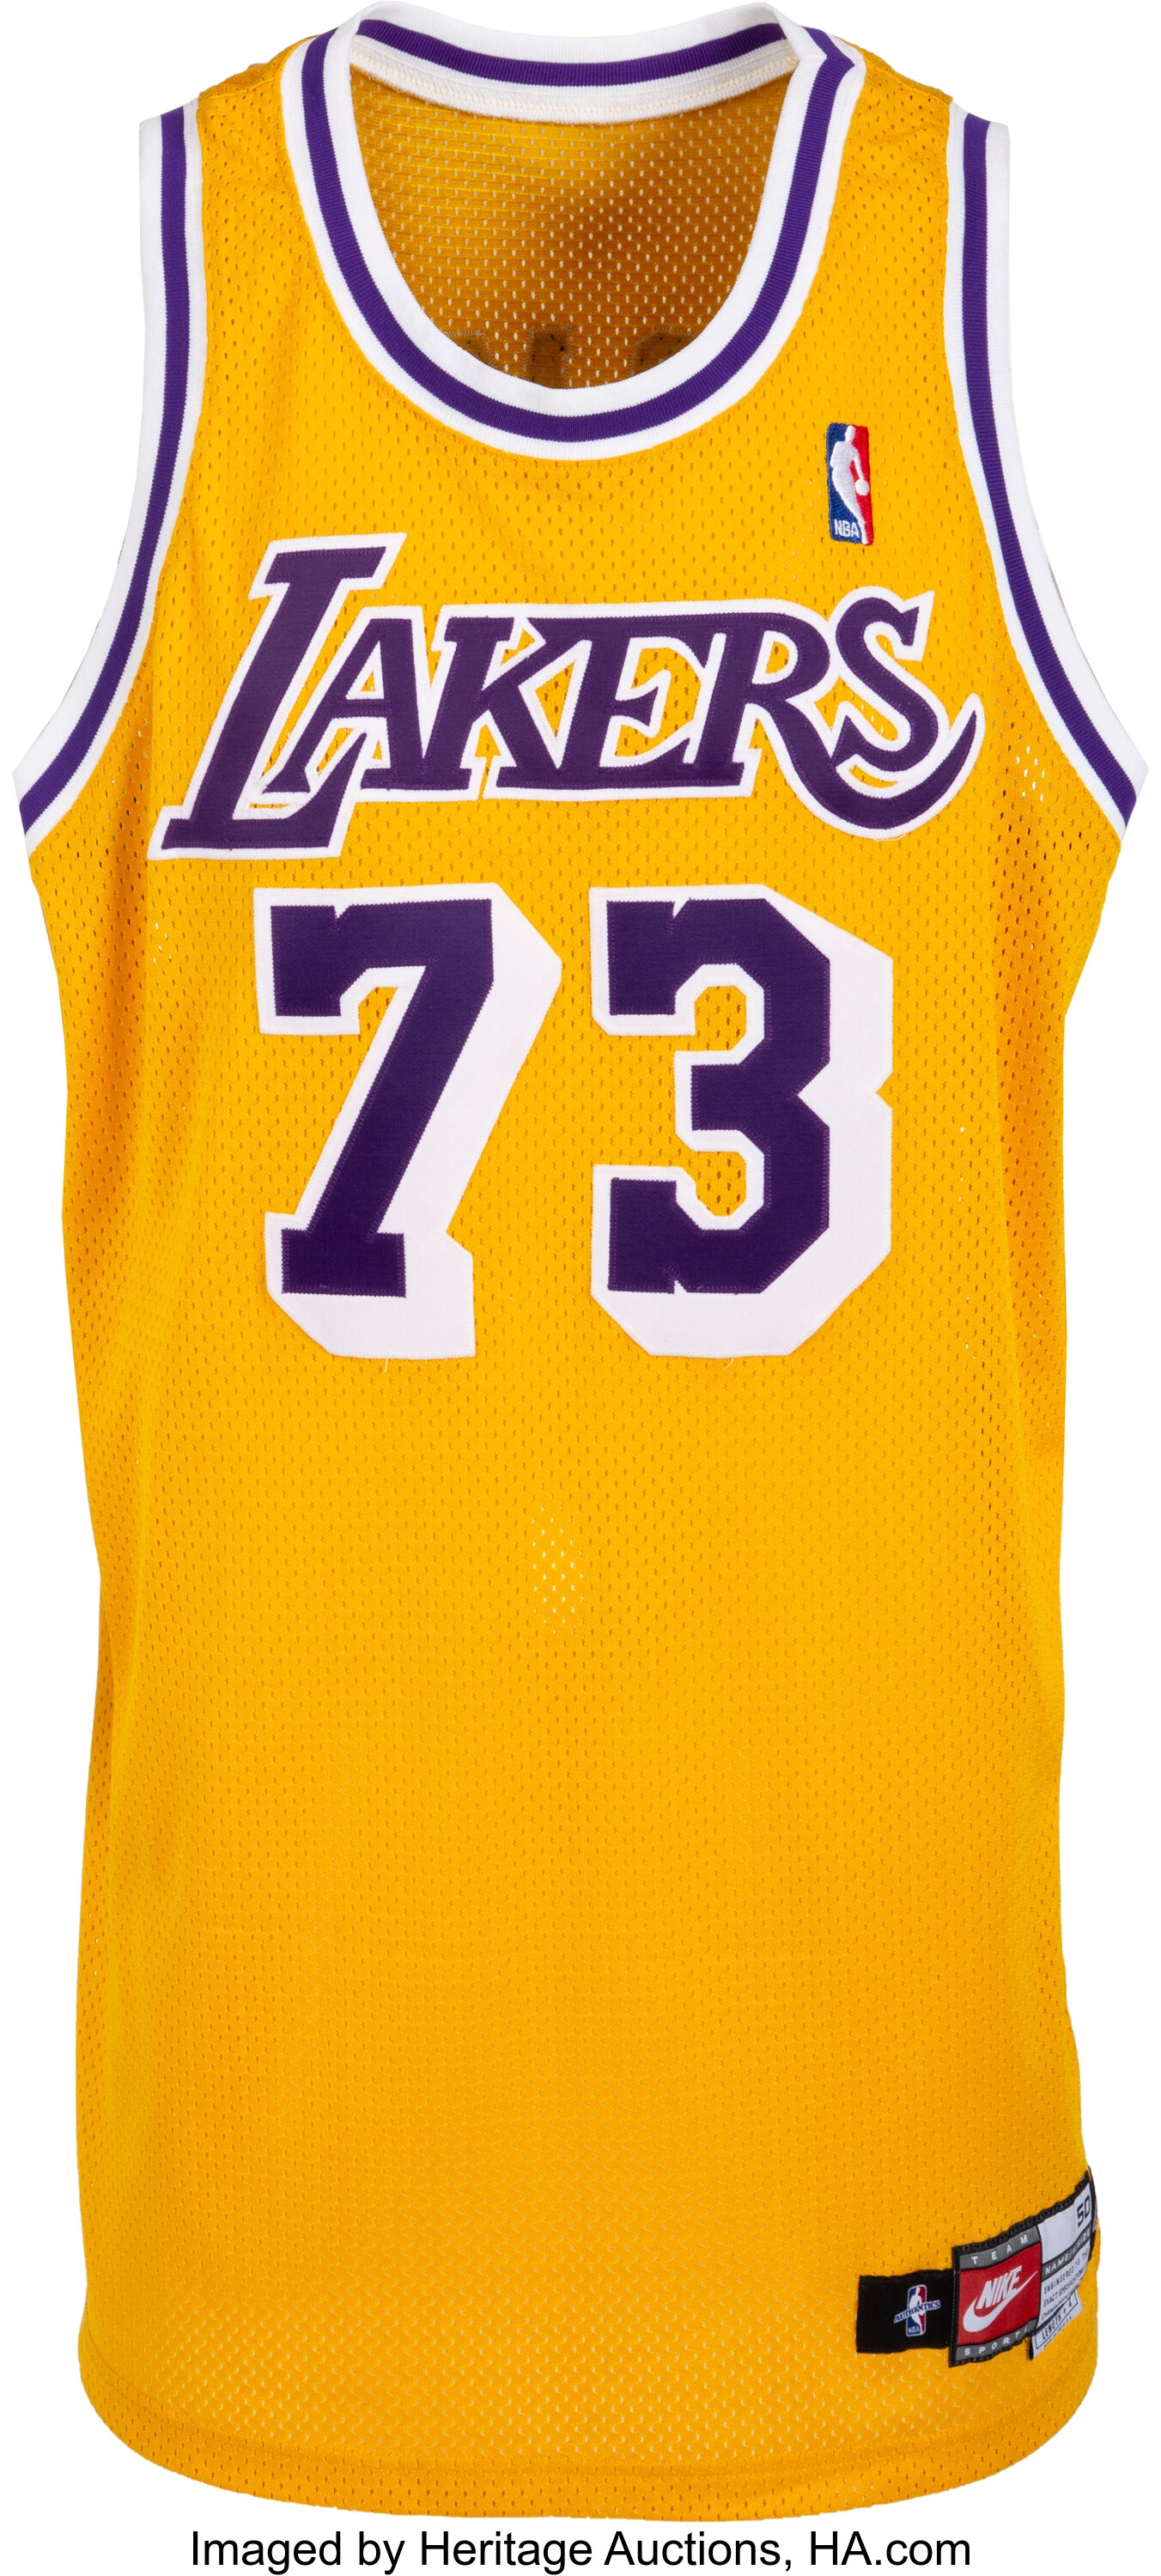 Dennis Rodman Vintage Lakers Jersey for Sale in Los Angeles, CA